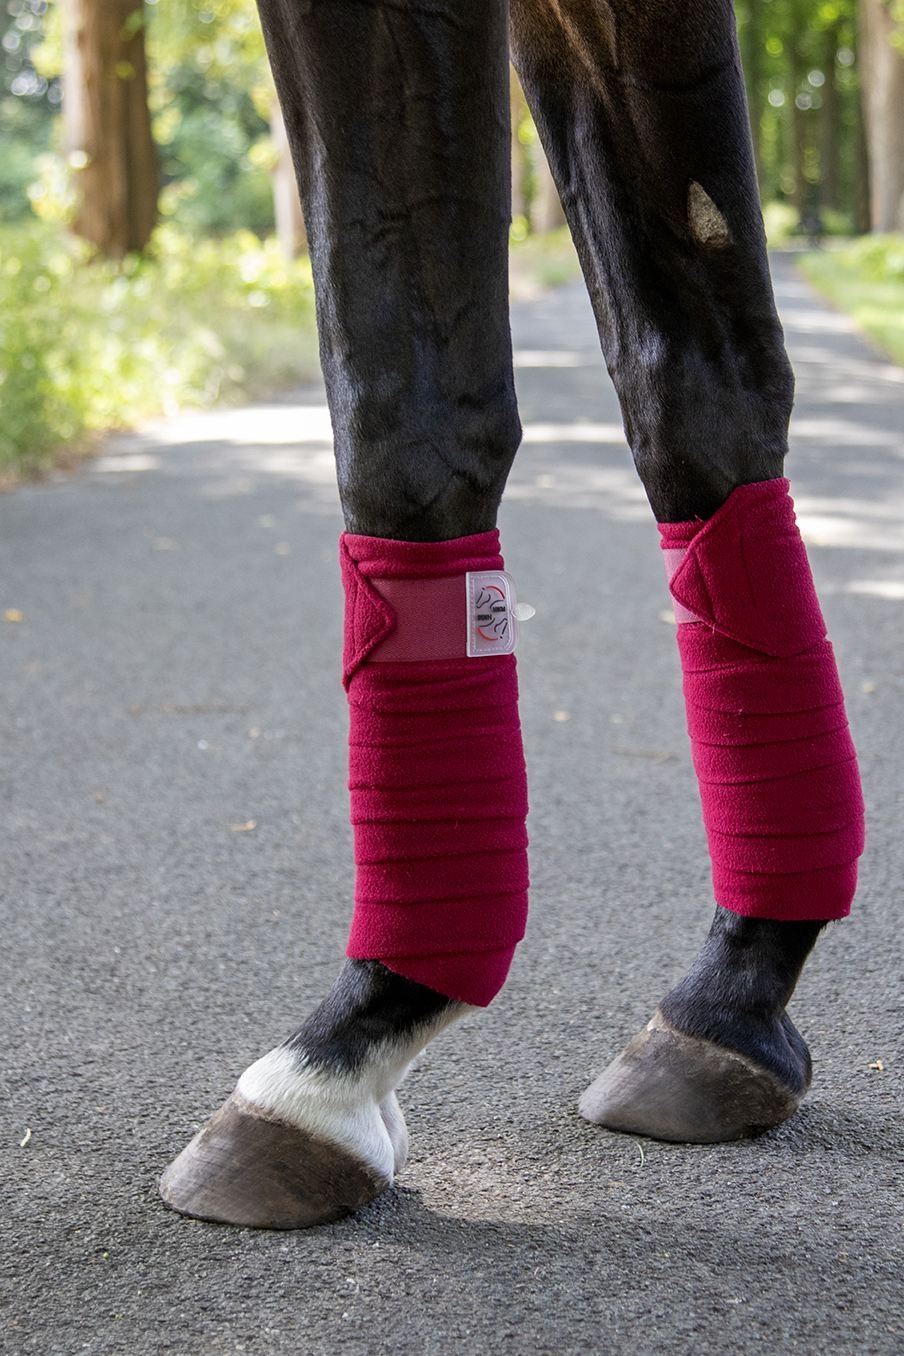 HKM Fleece Bandages Performance - Just Horse Riders